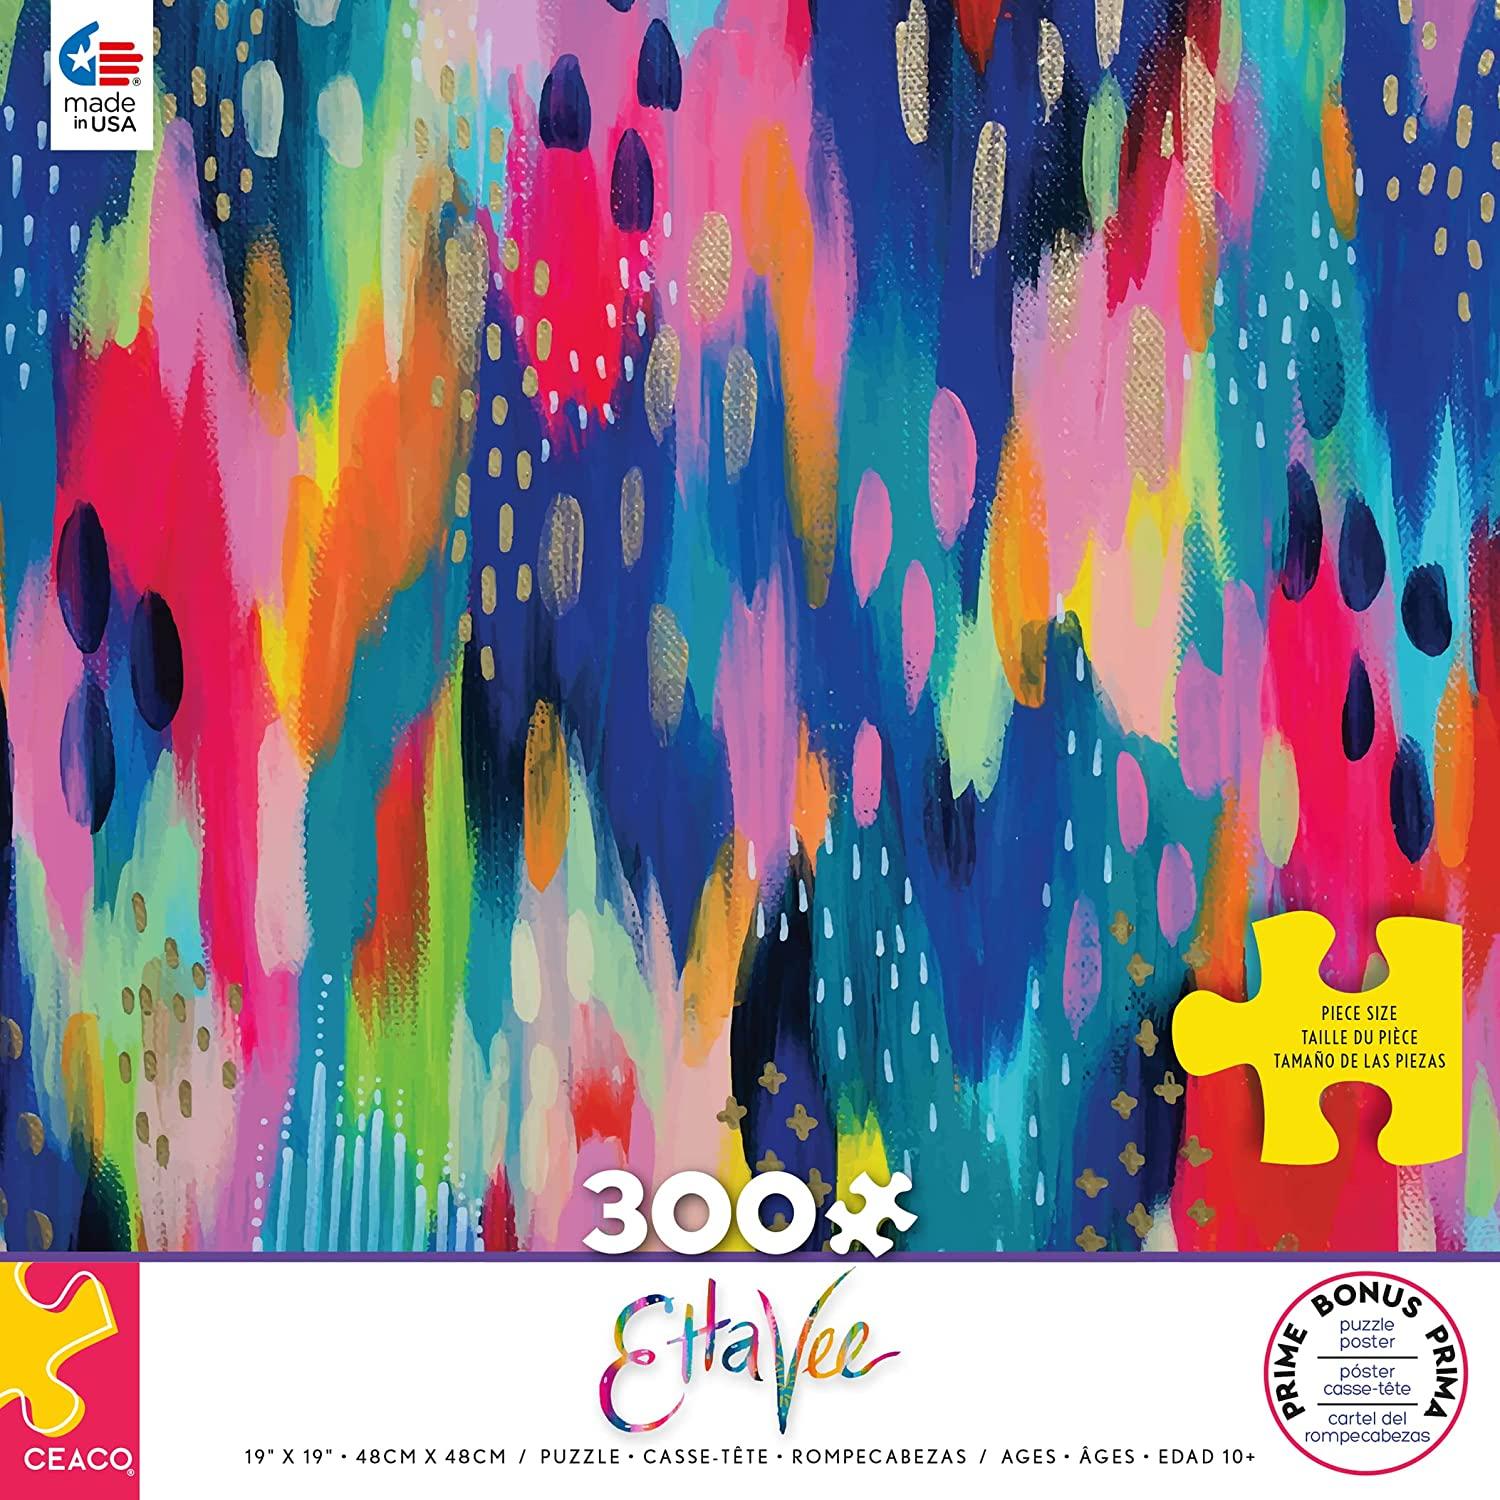 This 300 oversized piece Etta Vee puzzle features a bold and vibrantly colorful abstract pattern. Artist, designer, social media influencer, Jessi Raulet, has become well known for her hand-painted designs. Etta Vee is her lifestyle brand that expresses optimism and joy through color.